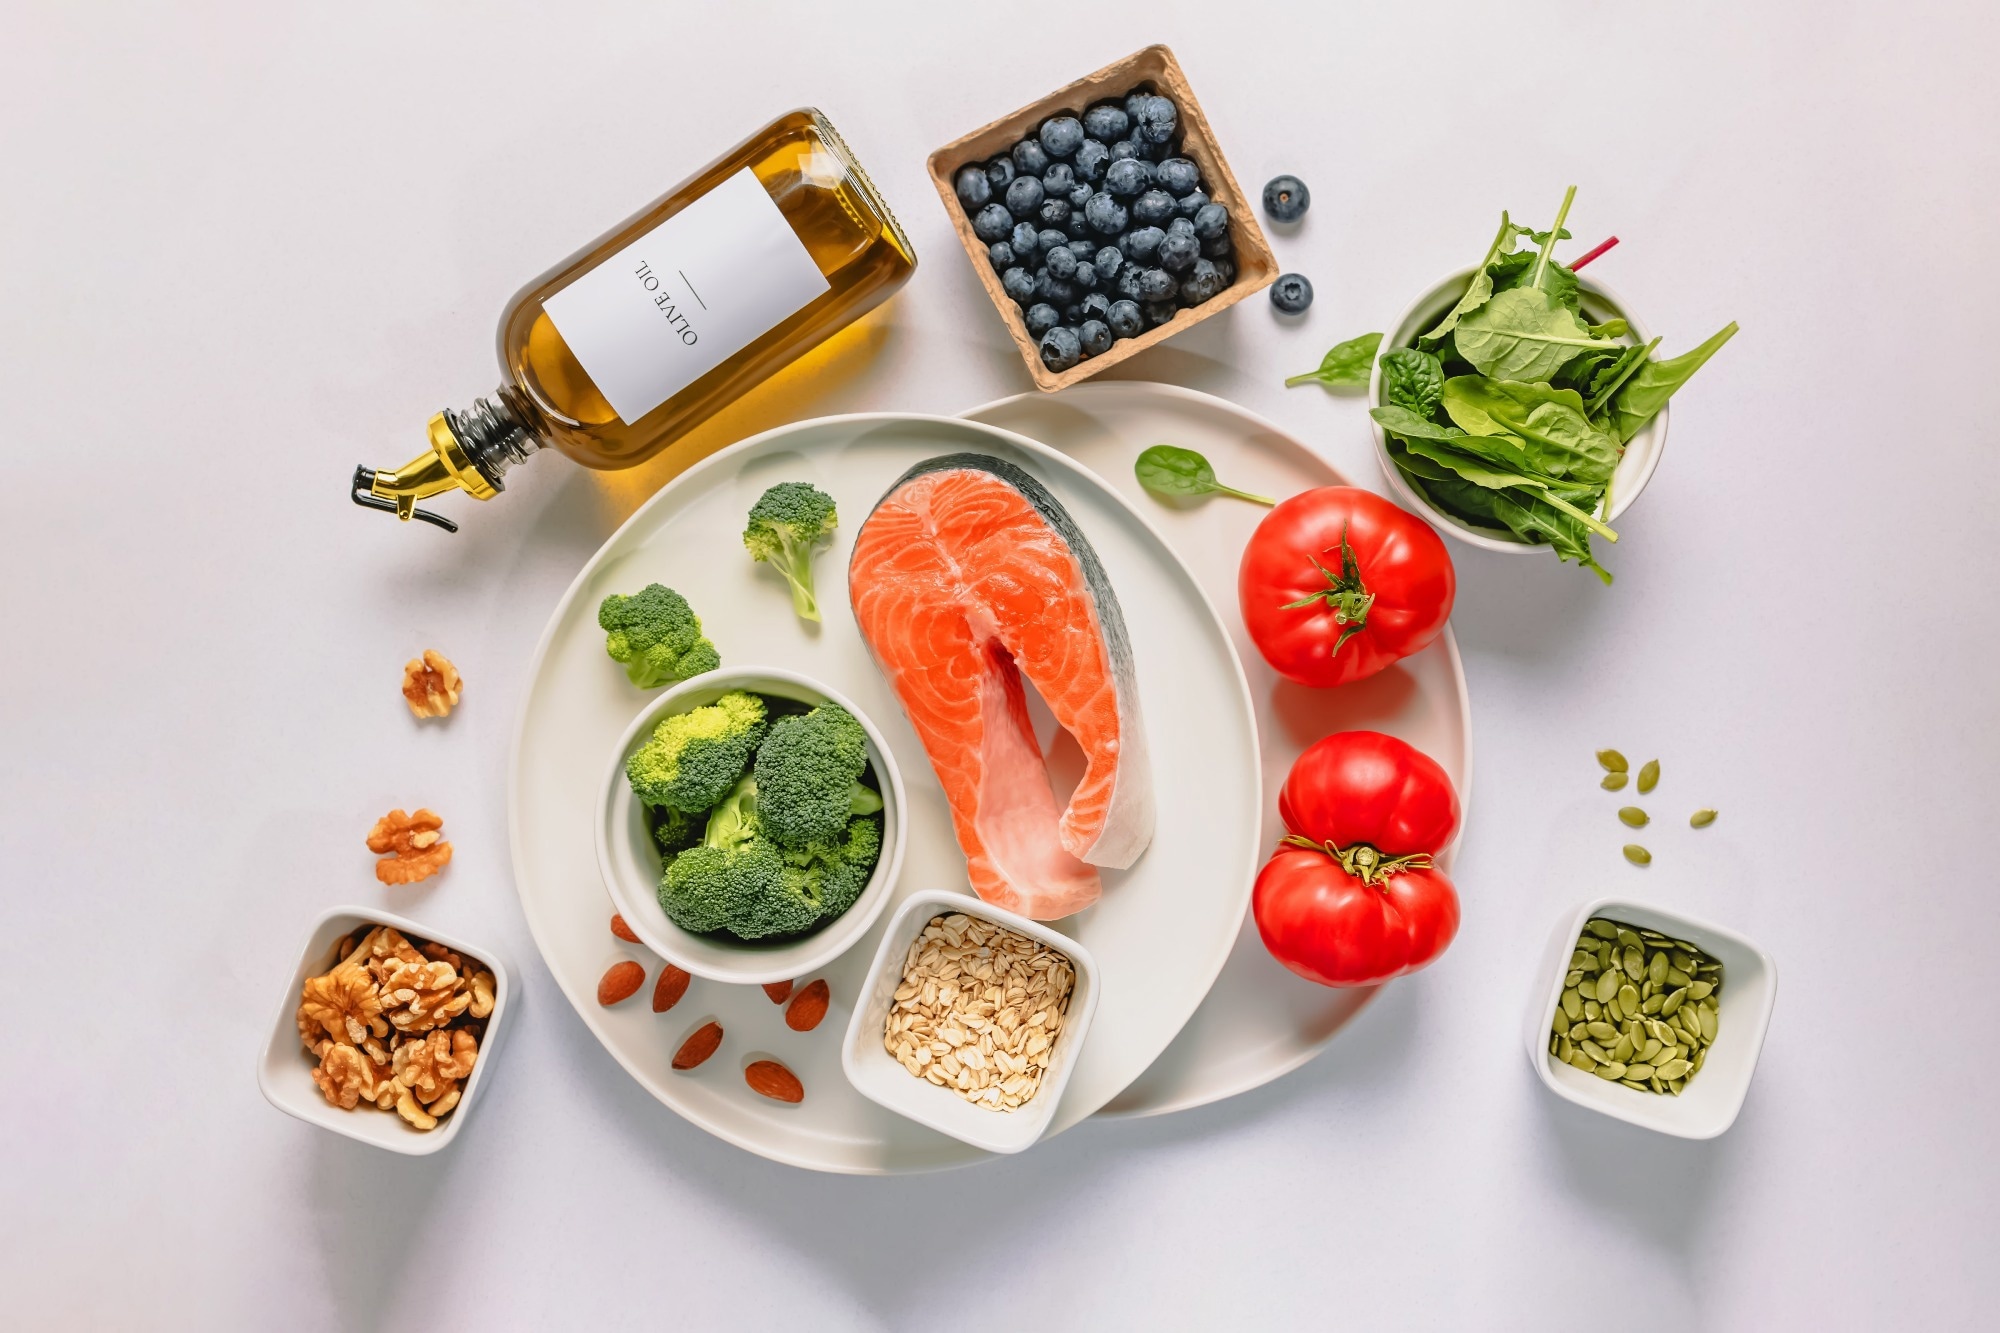 Study: A low-inflammatory diet is associated with a lower incidence of diabetes: role of diabetes-related genetic risk. Image Credit: Chiociolla/Shutterstock.com